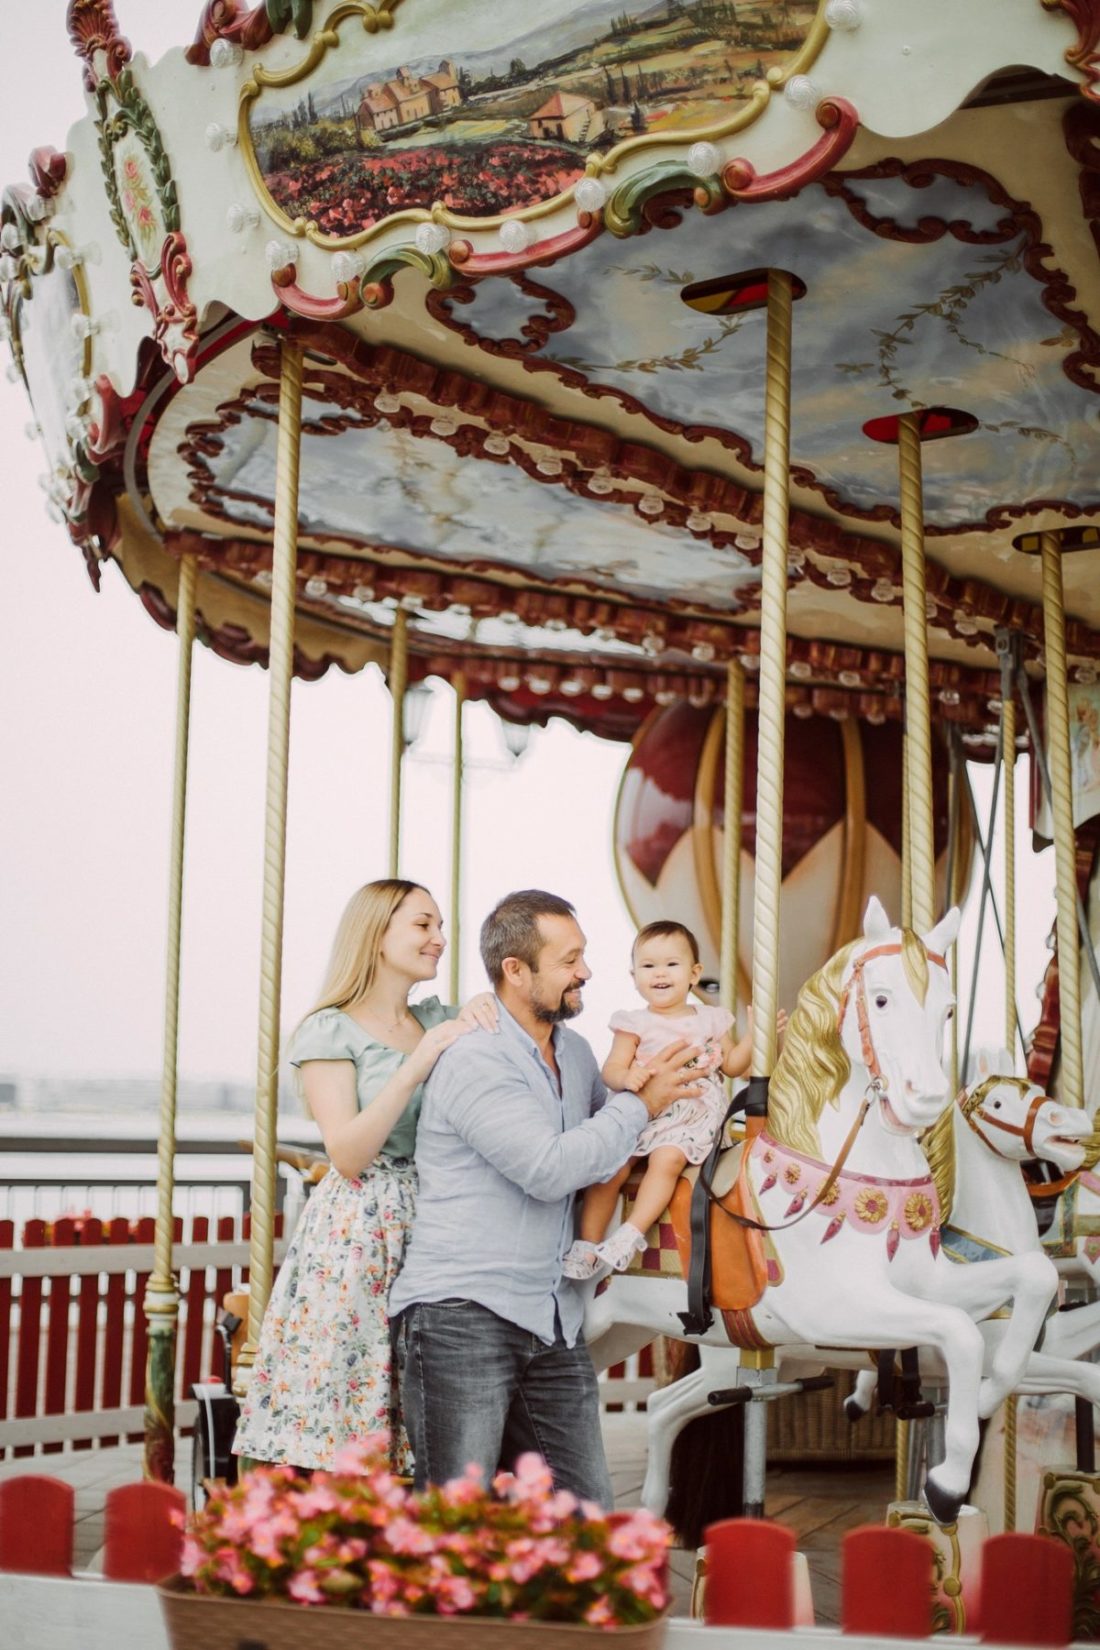 a young family with a baby girl having fun in an amusement Park on a carousel